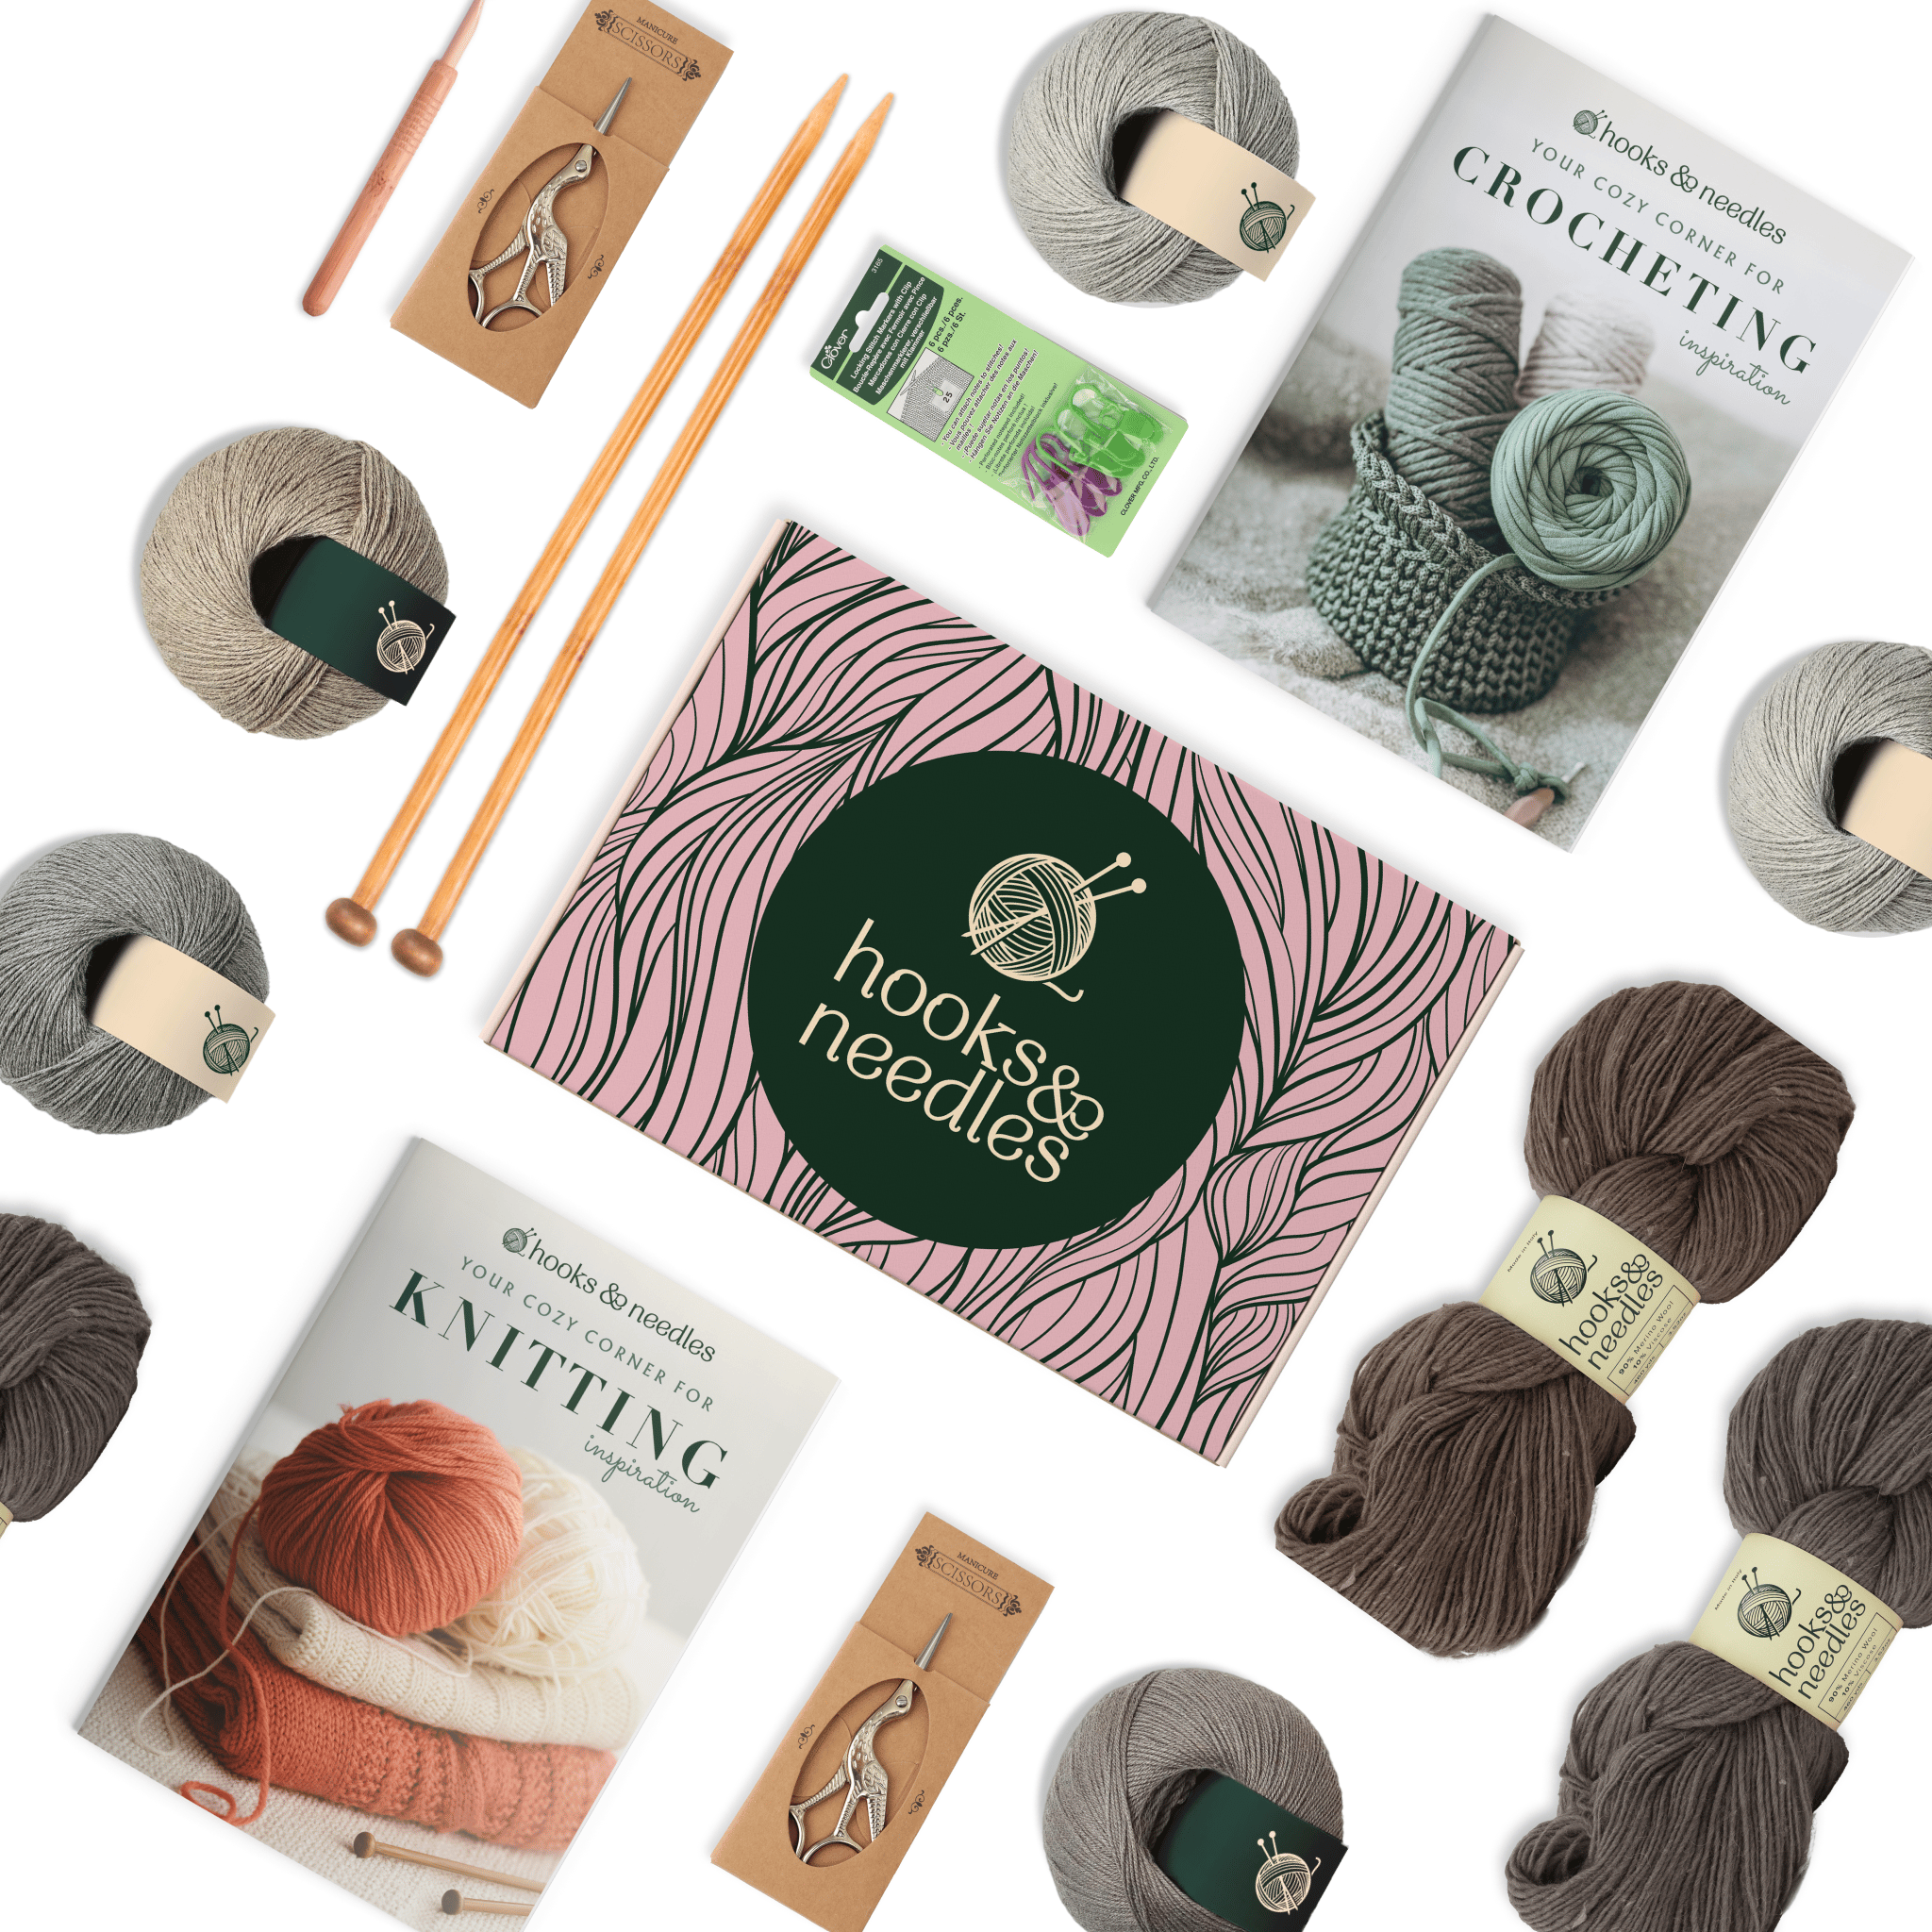 Flat lay of knitting supplies including yarn balls, bamboo needles, and instructional books on crochet and knitting, arranged around a [6-Month-Prepaid] Hooks & Needles Subscription Box #20 with a logo featuring a ball of yarn and needles.